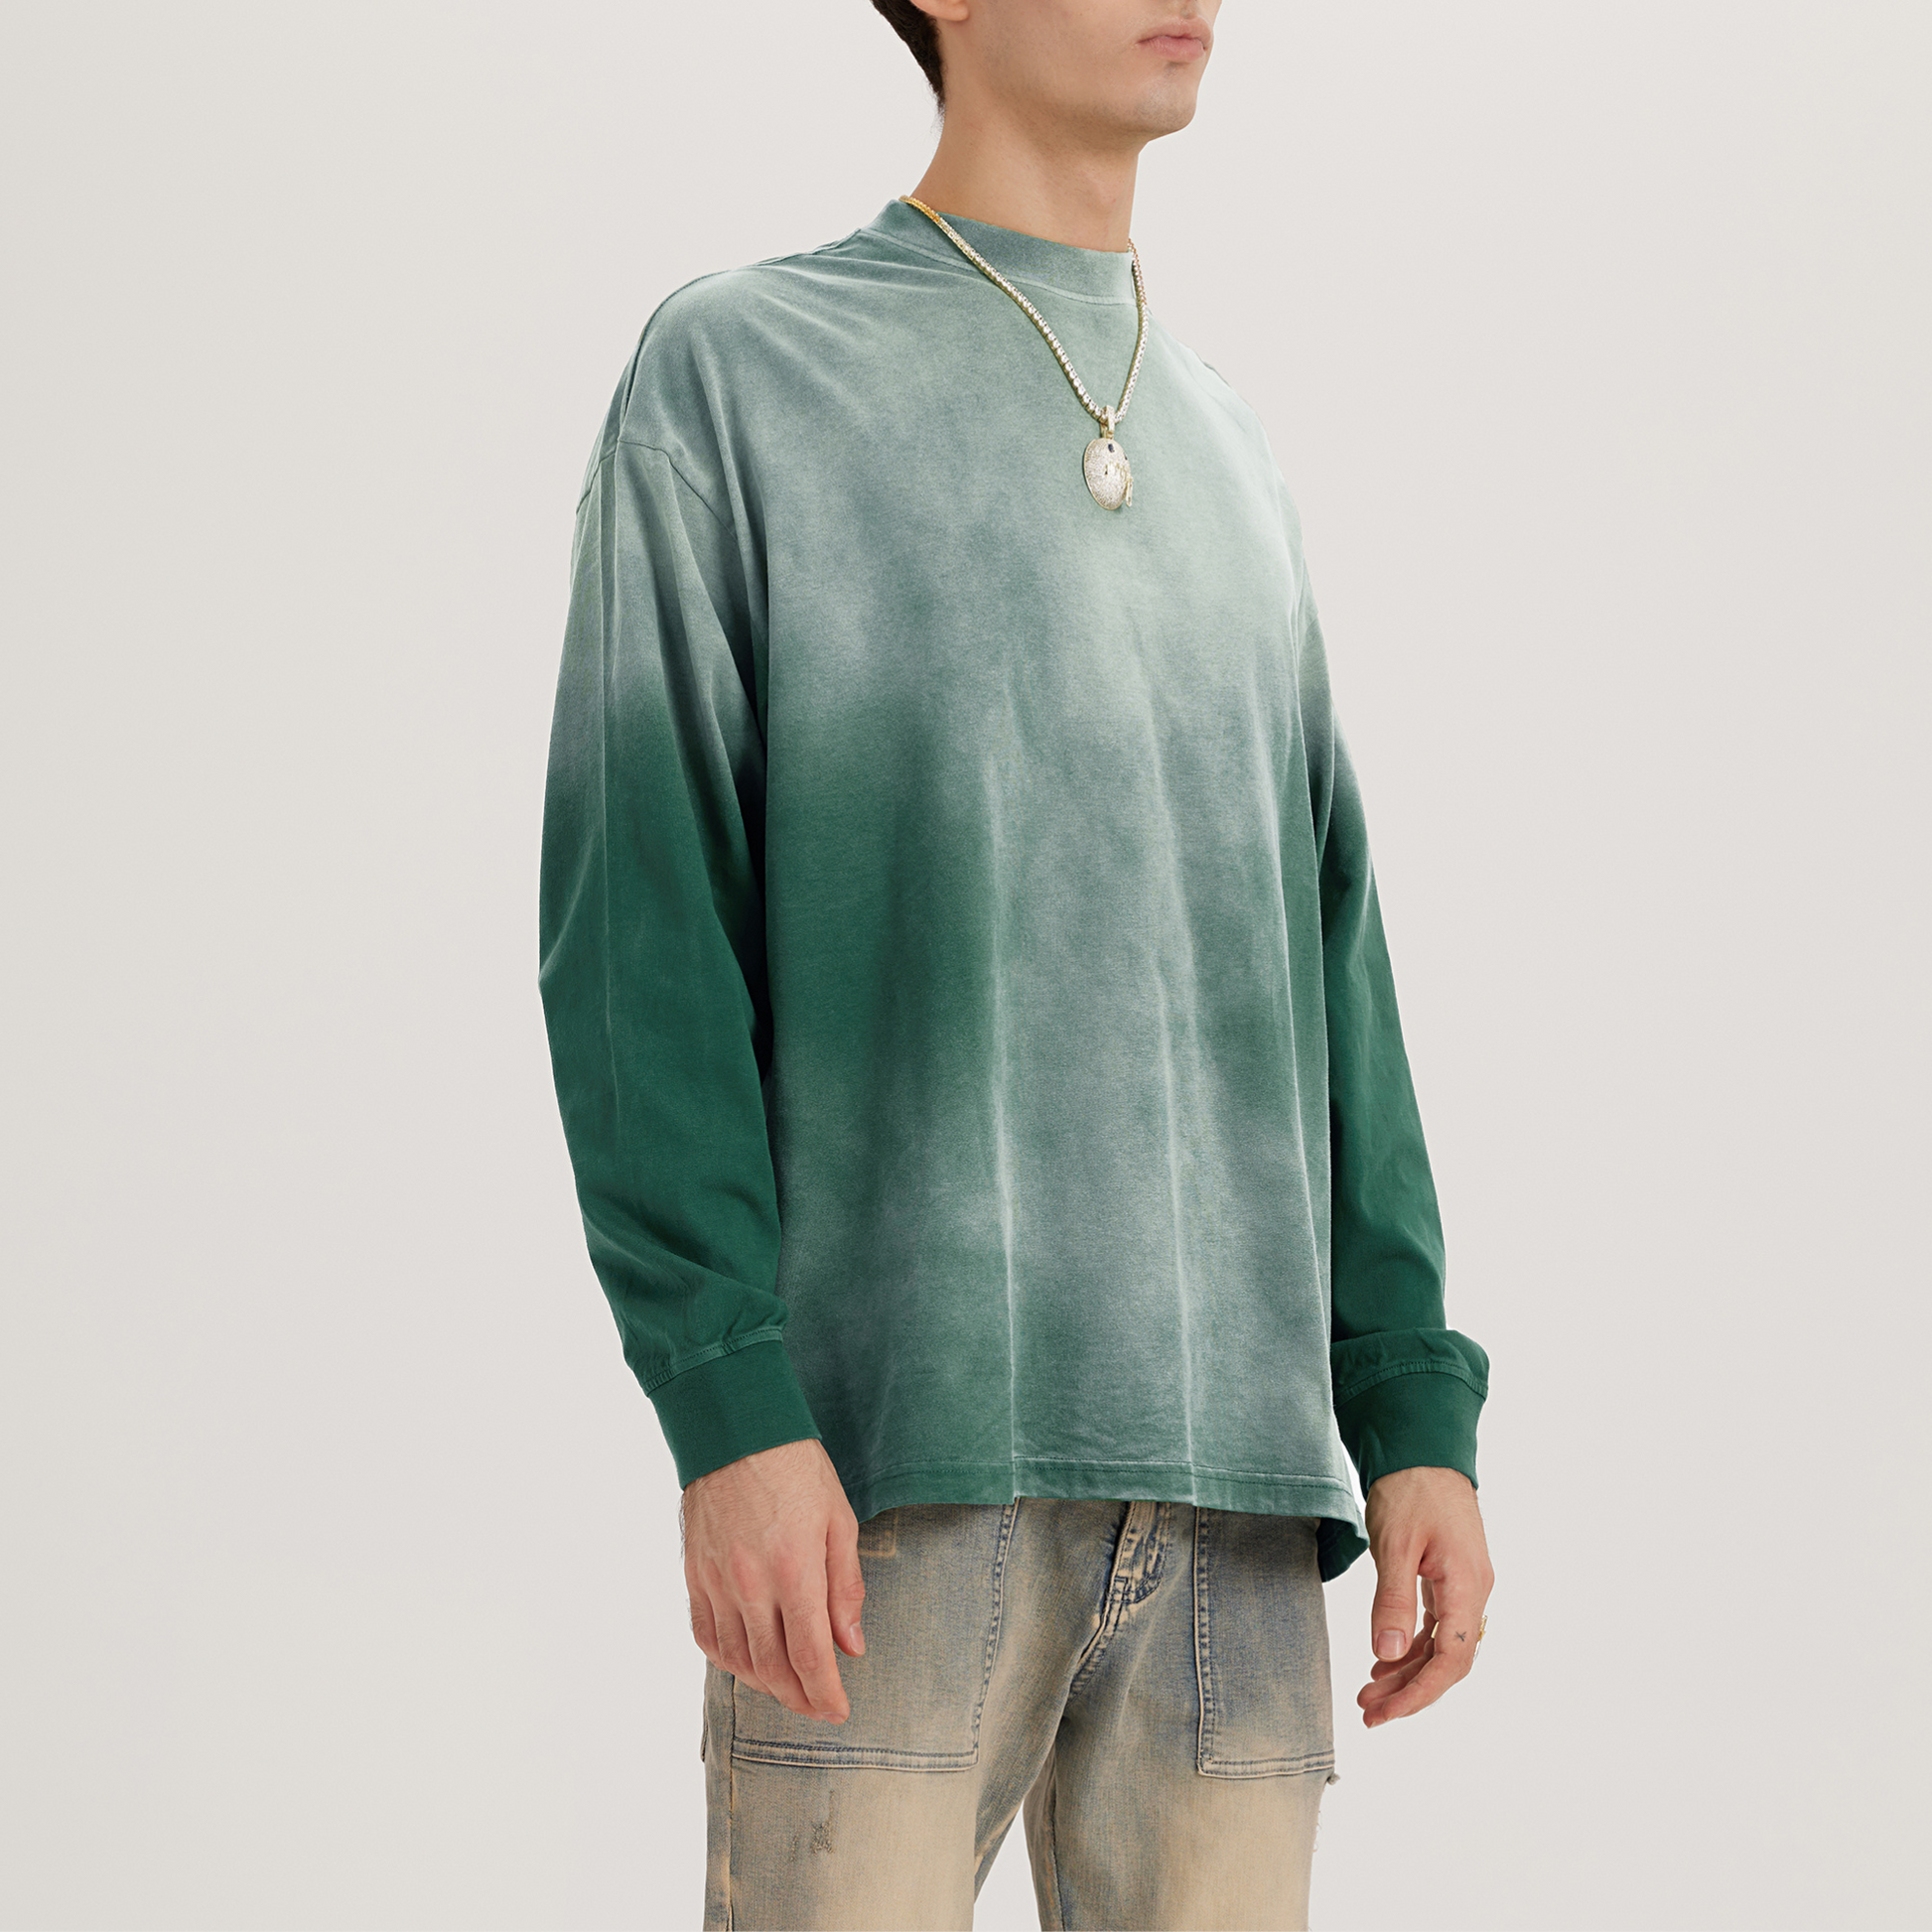 front left view of green streetwear crewneck with faded dyed hues, model with denim jeans and necklace